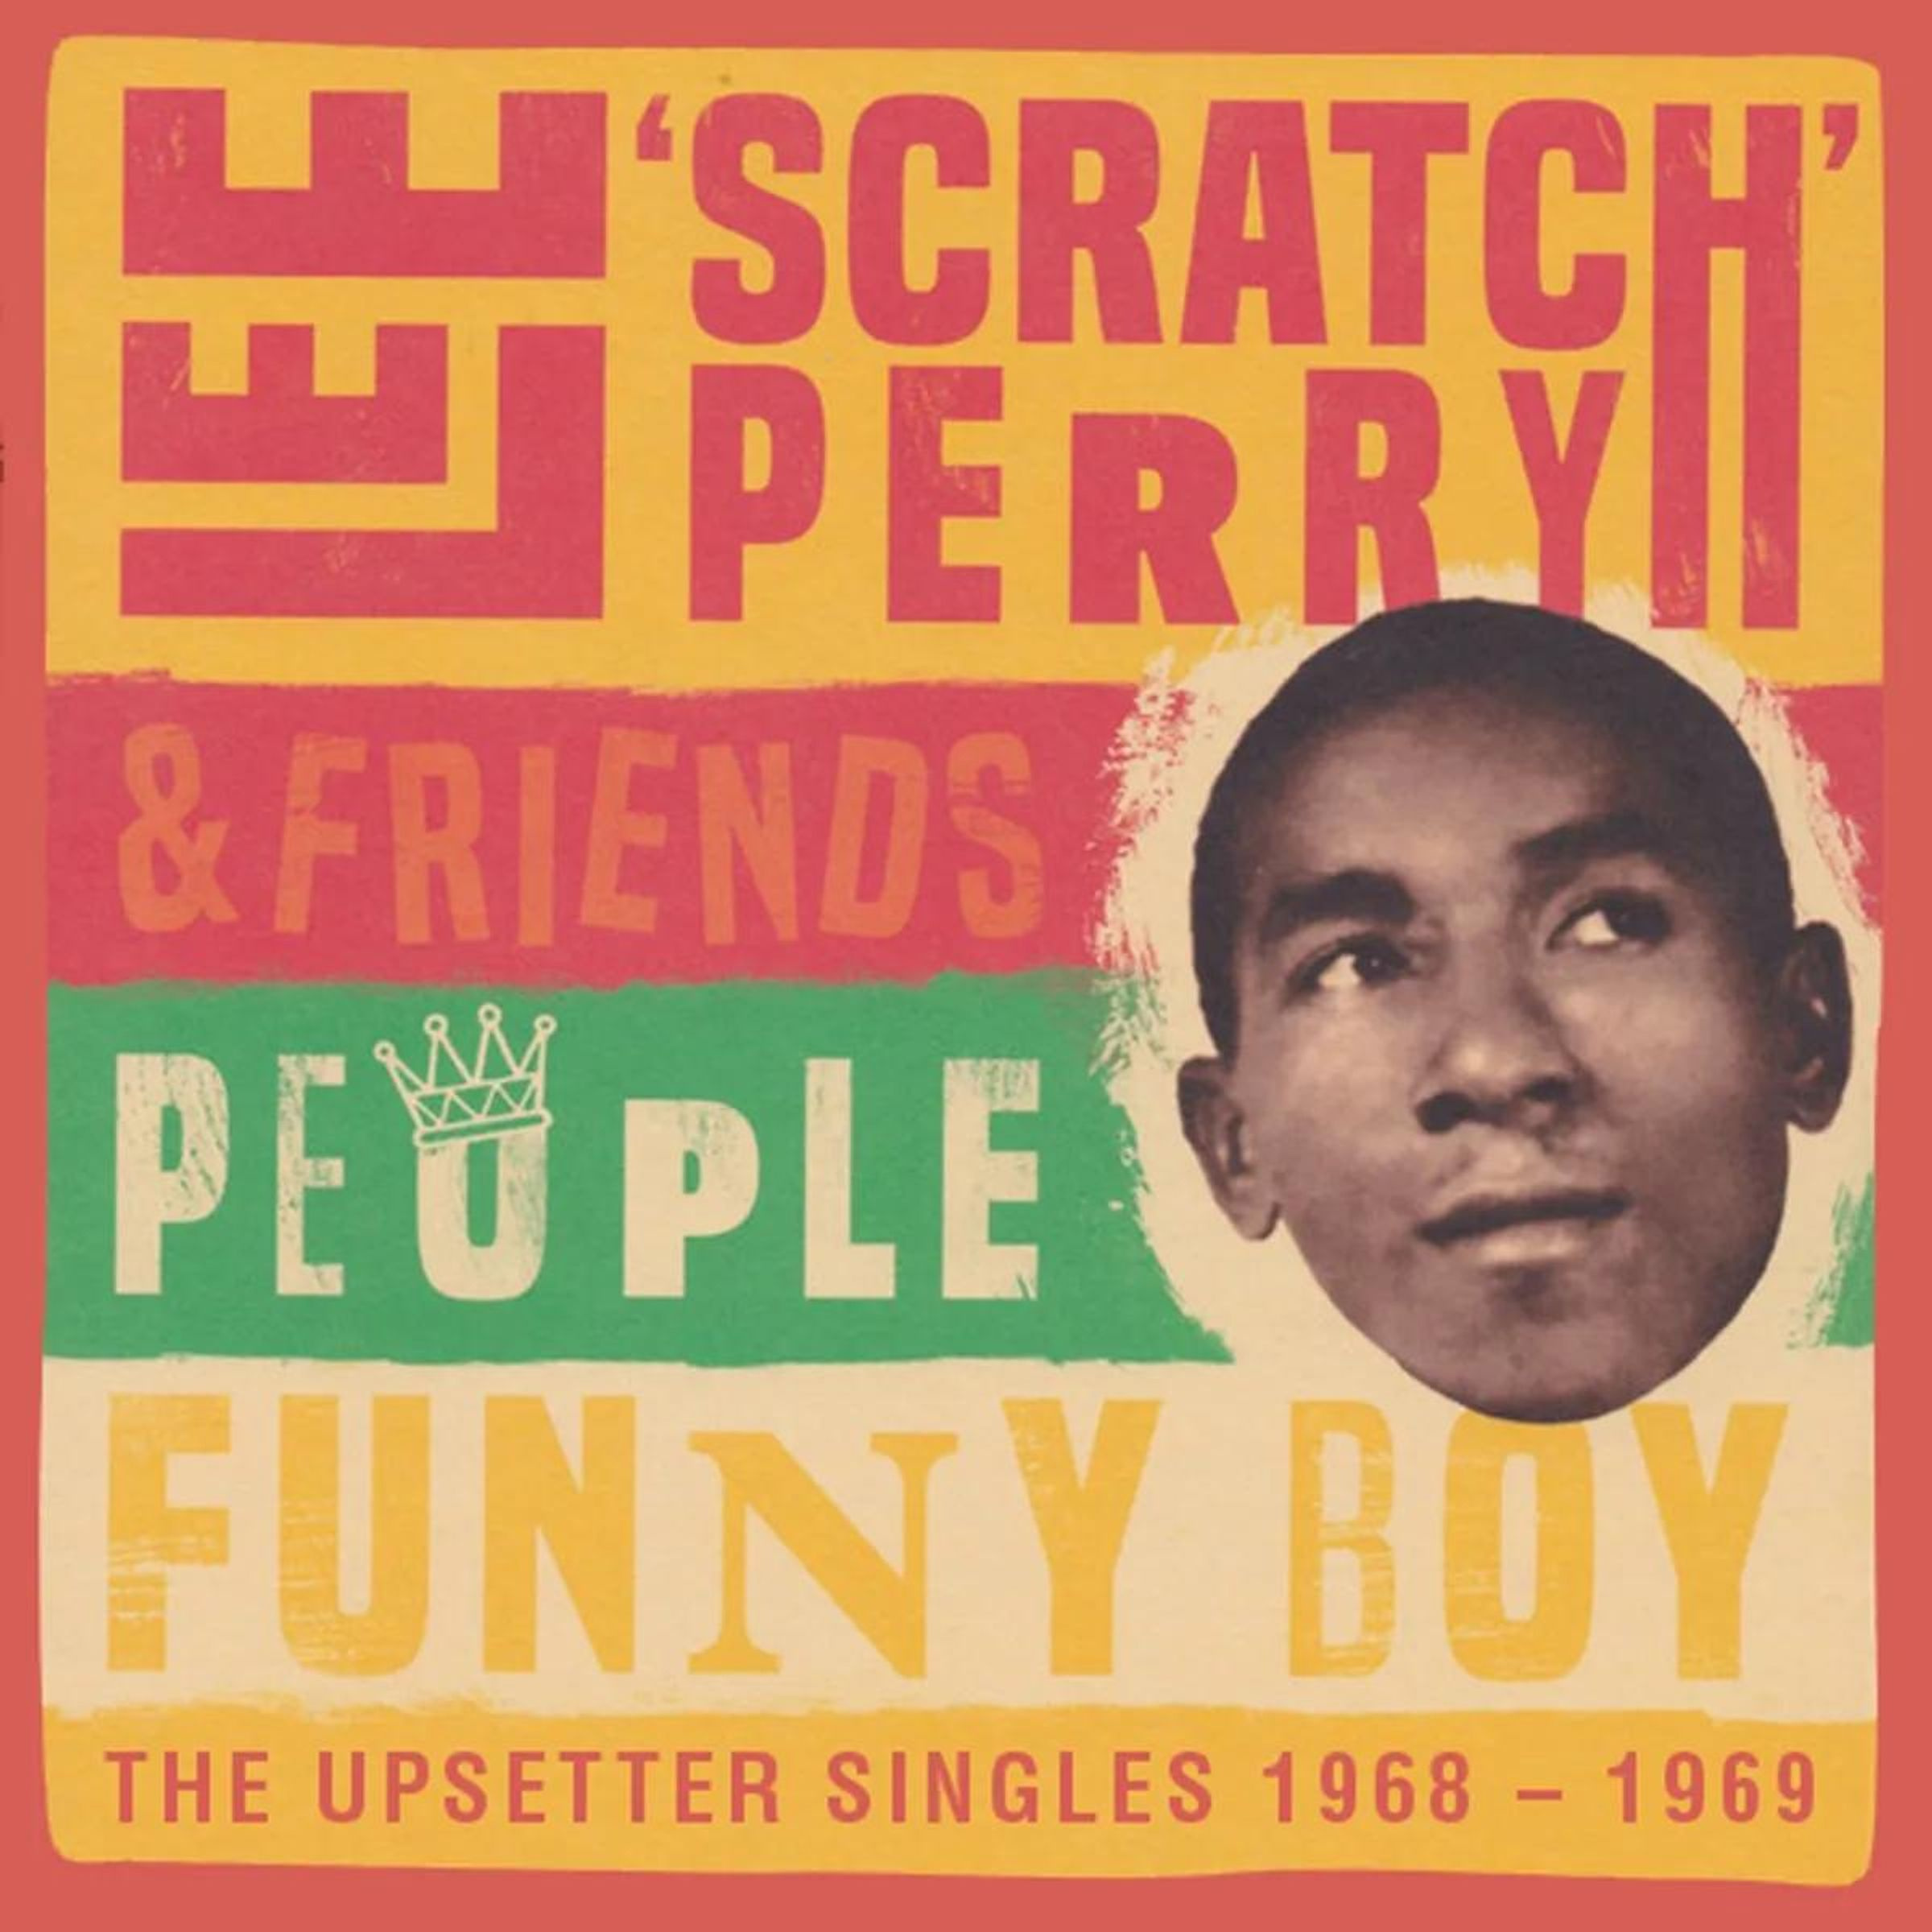 PEOPLE FUNNY BOY - THE UPSETTER SINGLES